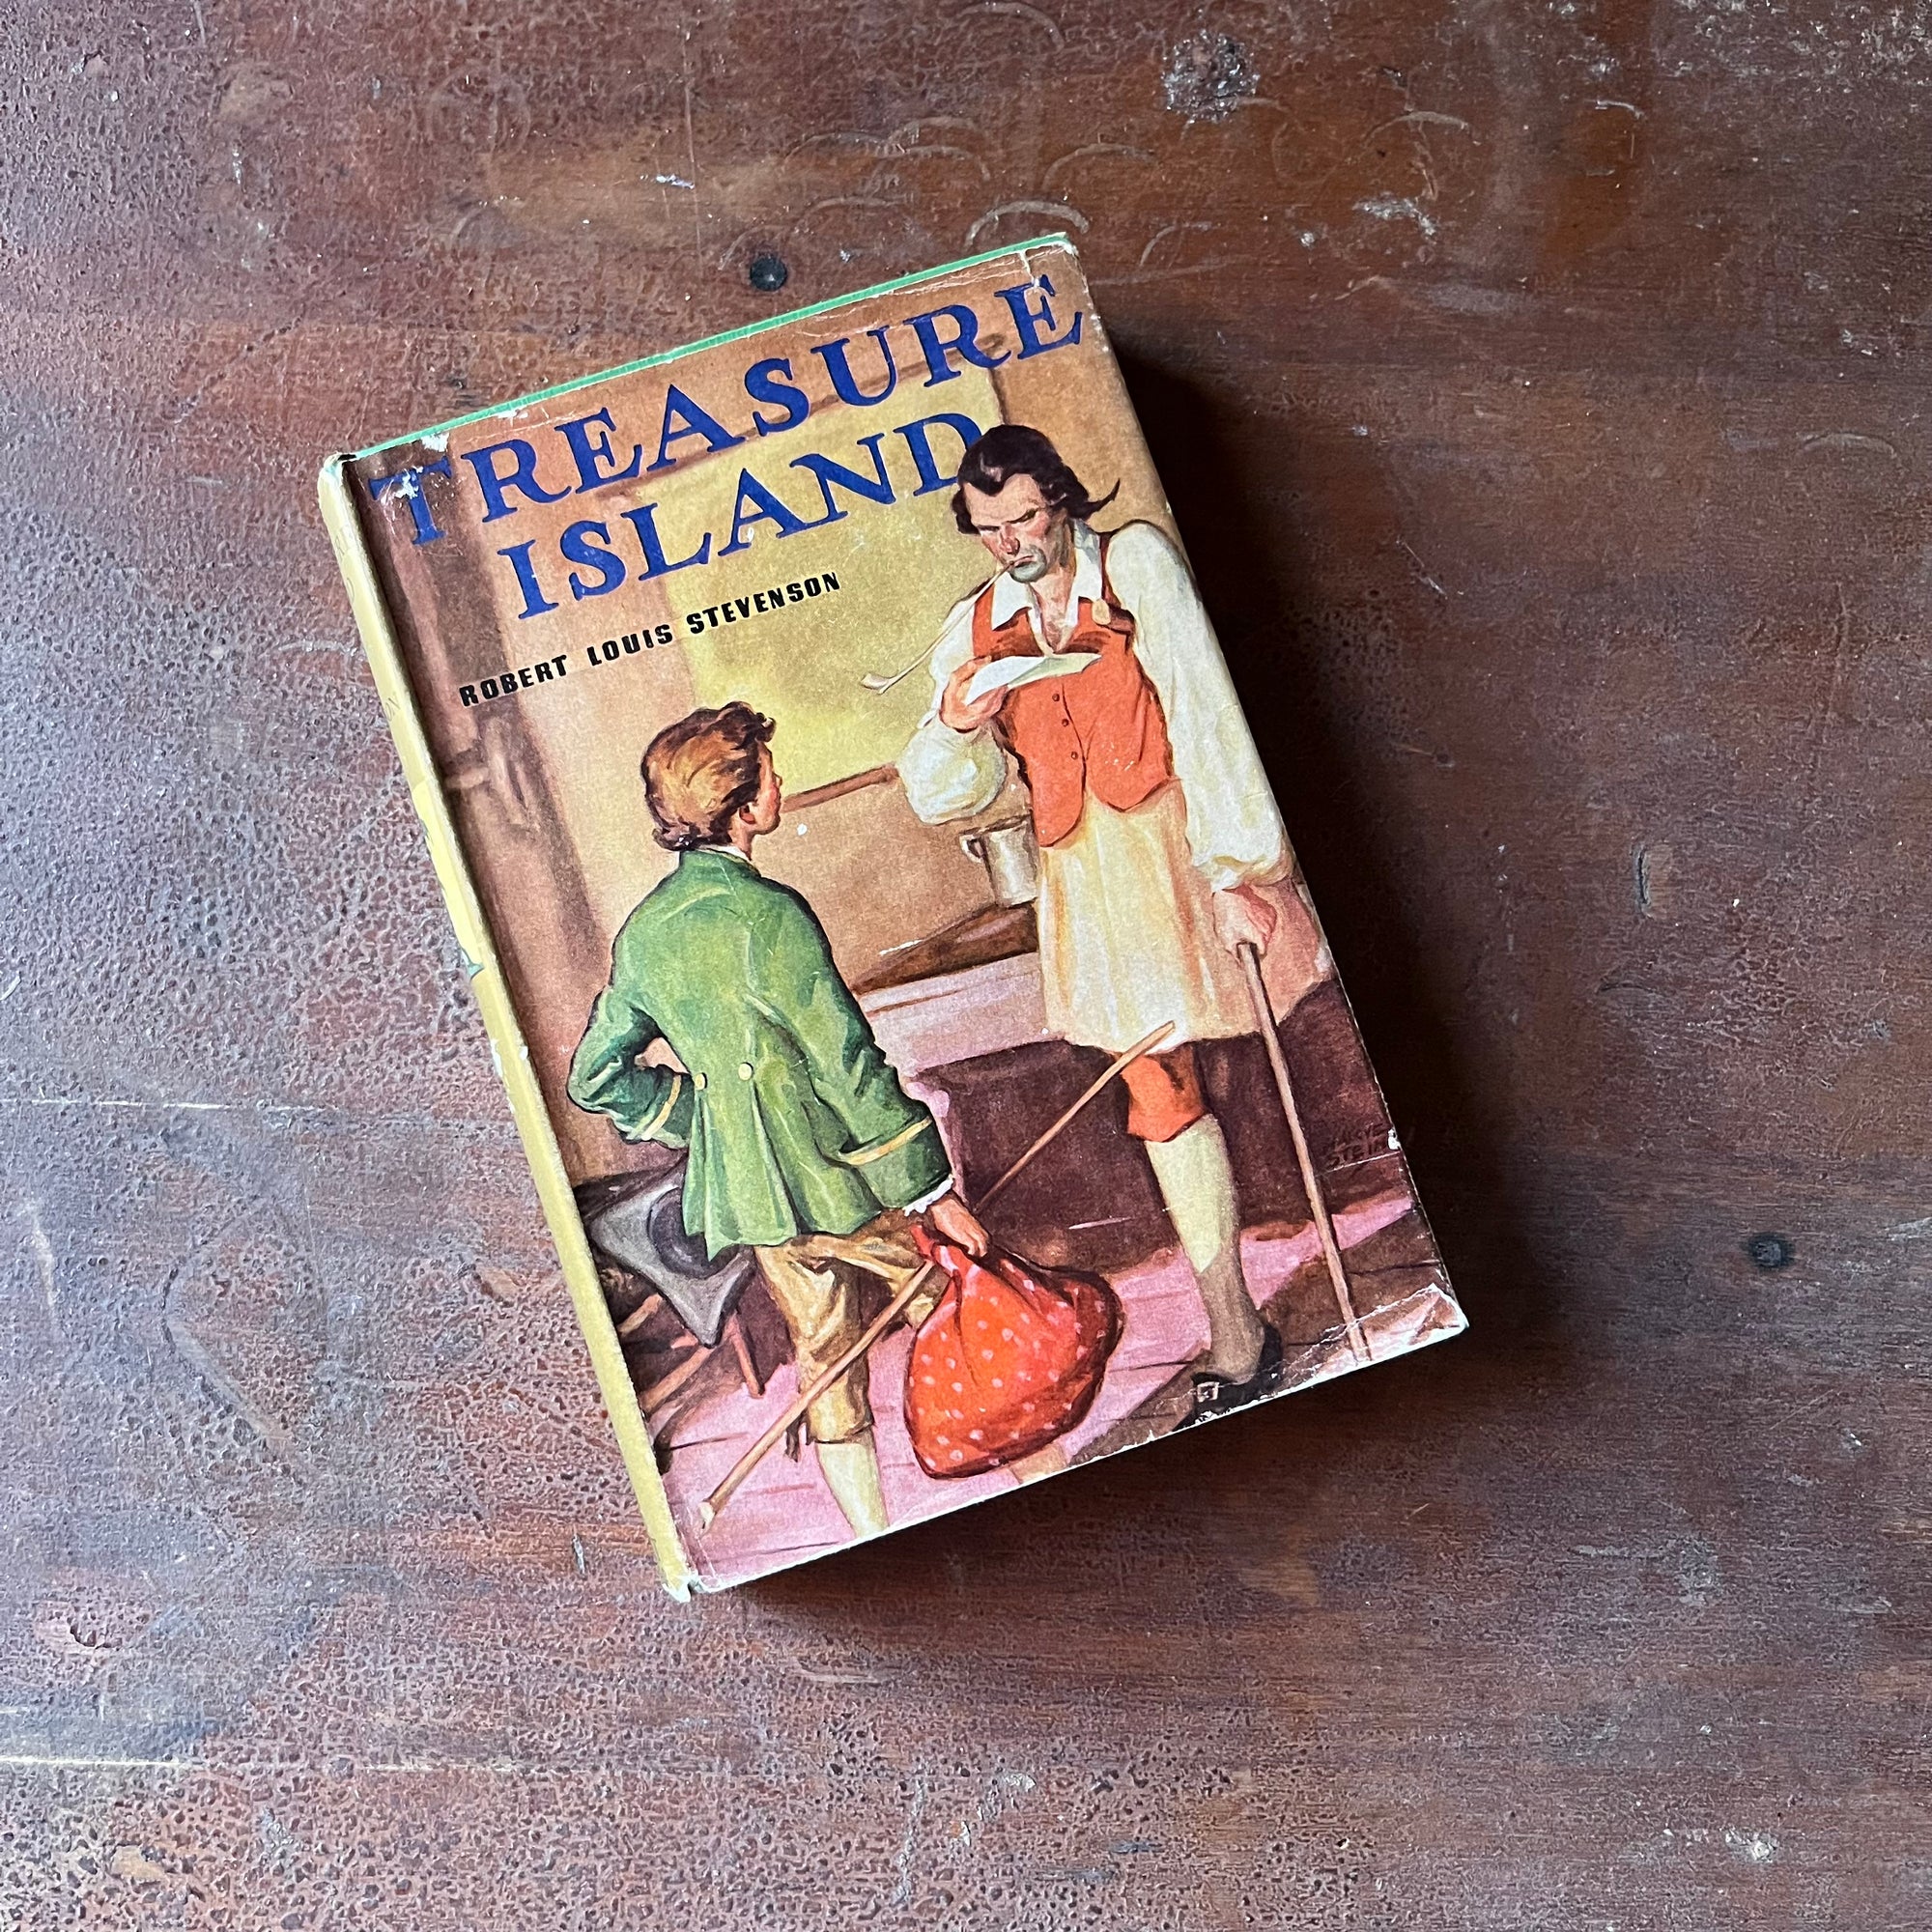 Treasure Island by Robert Louis Stevenson - a Grosset & Dunlap Edition - view of the dust jacket's front cover